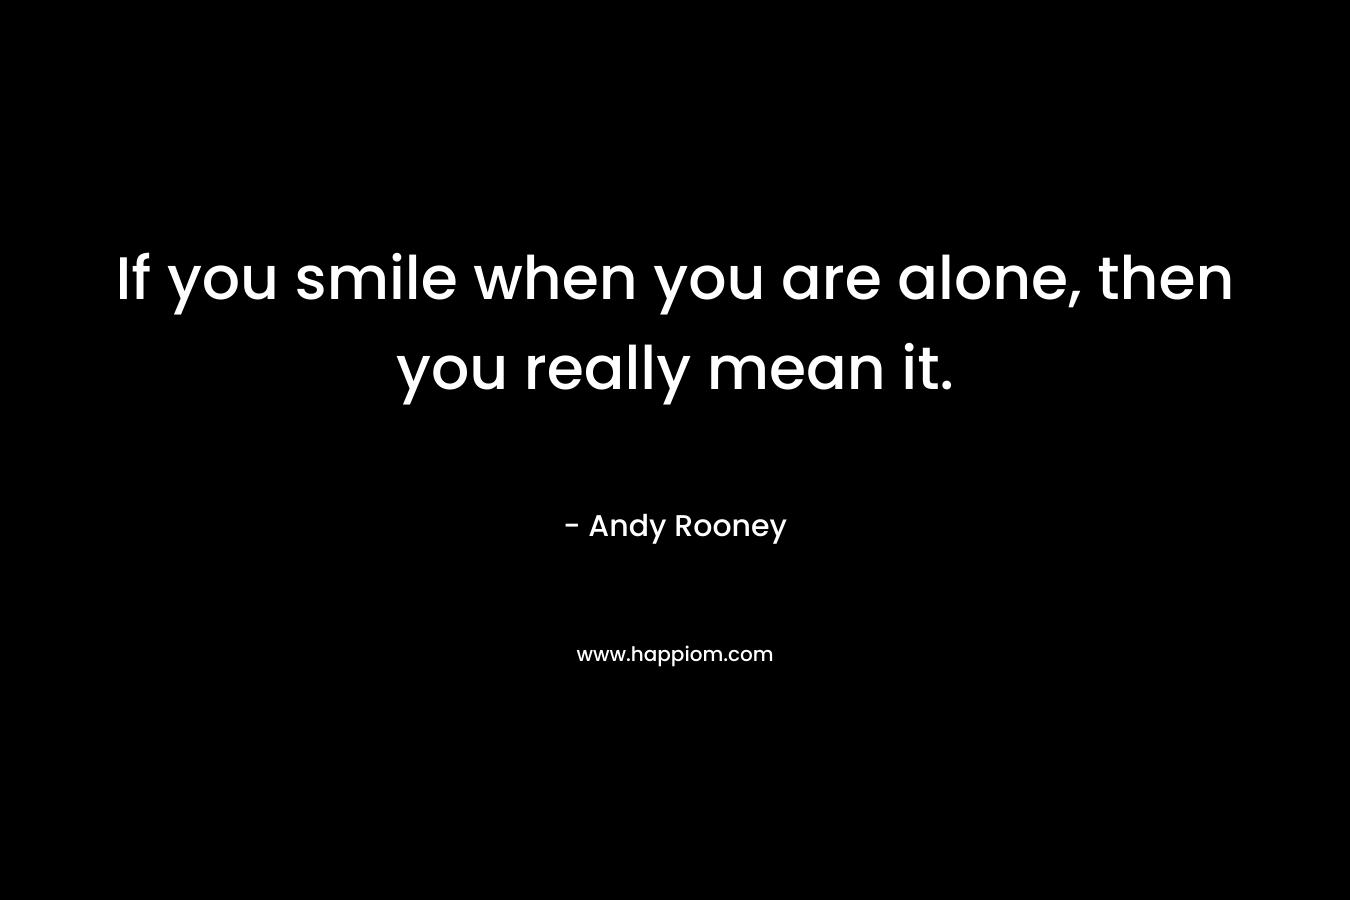 If you smile when you are alone, then you really mean it. – Andy Rooney